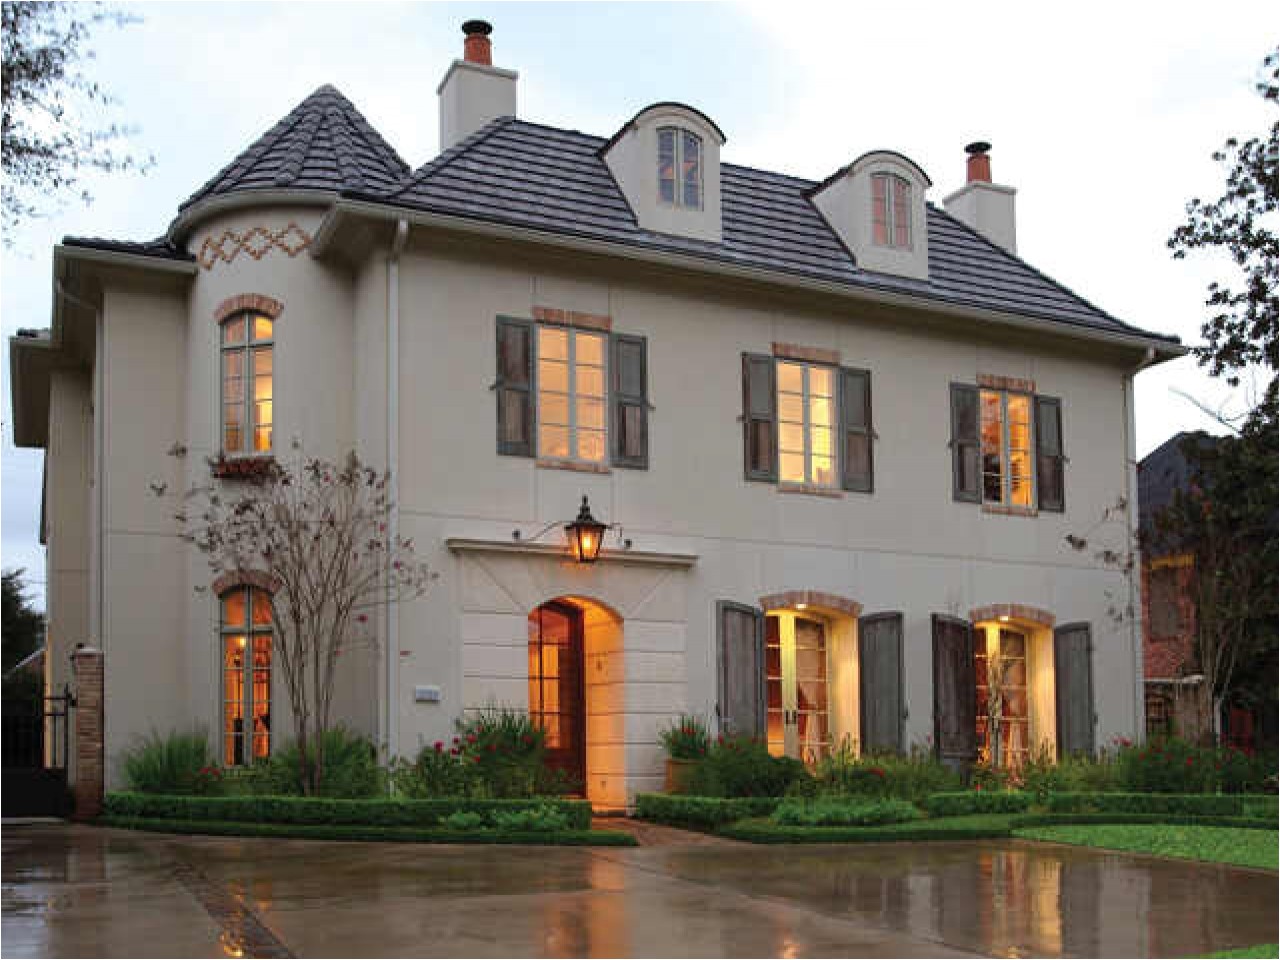 French Style Homes Plans French Style House Exterior French Chateau Architecture